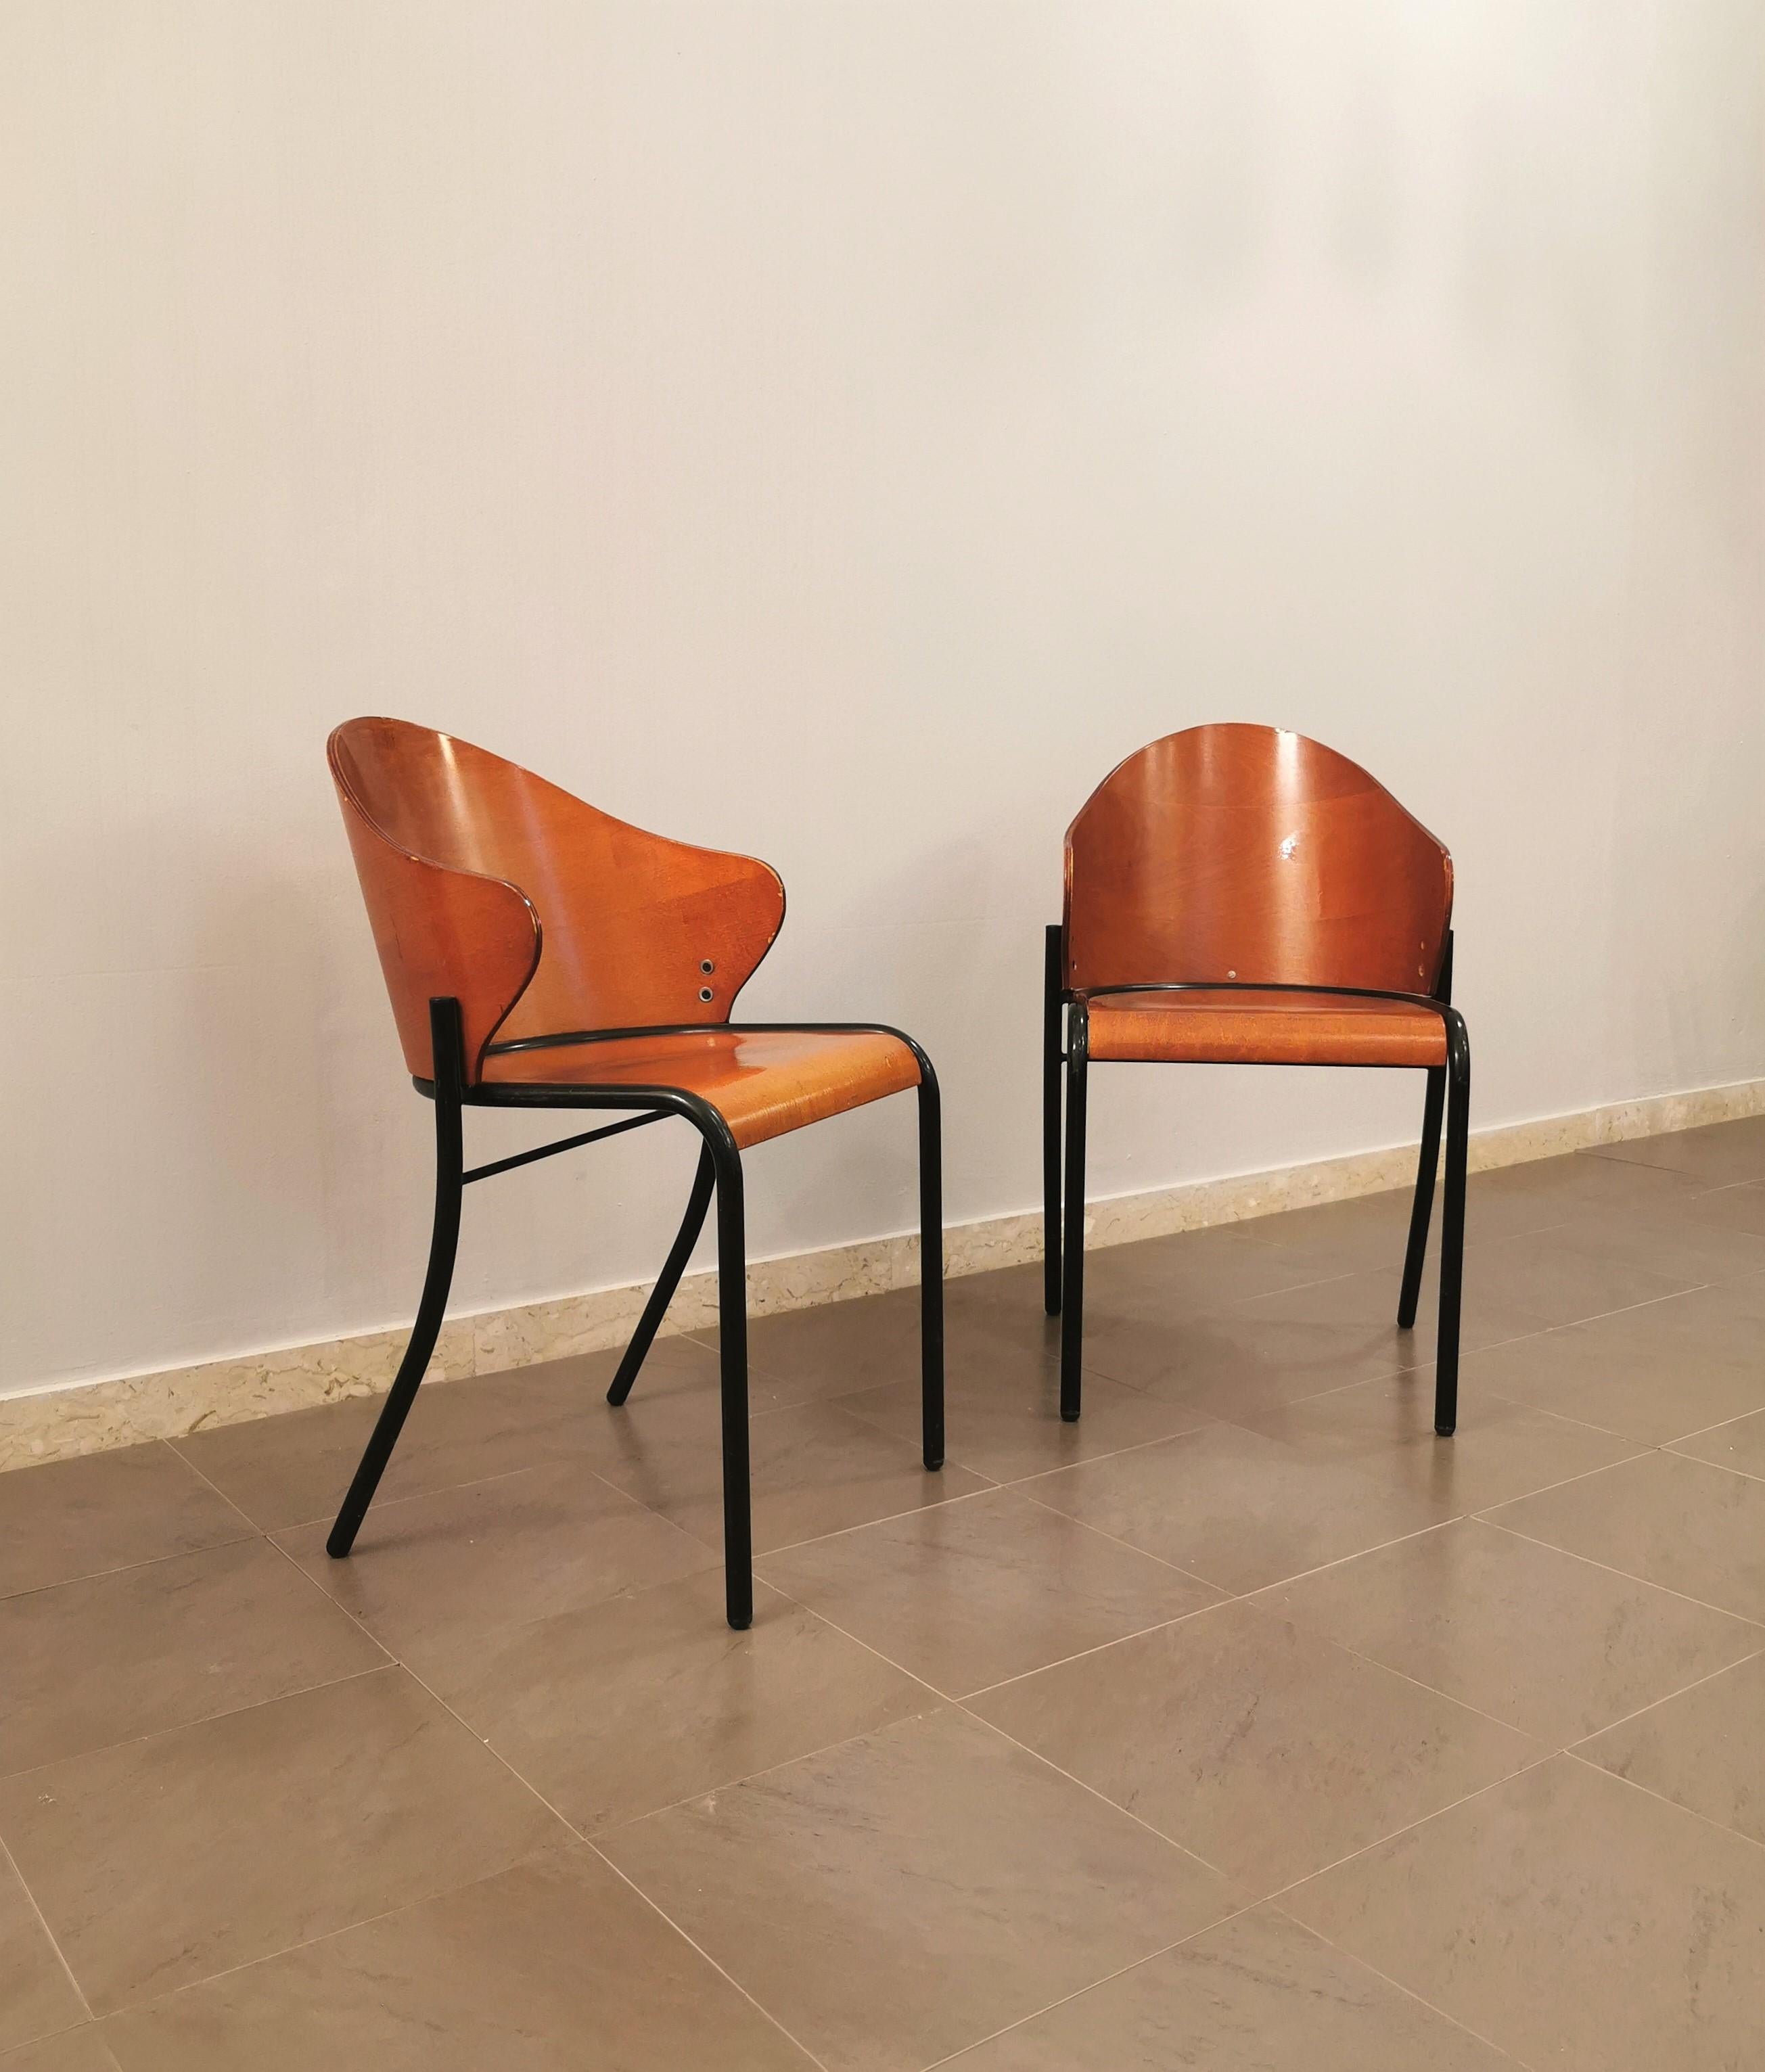 Italian Midcentury Dining Room Chairs Curved Wood Enameled Metal Italy 1960s Set of 2